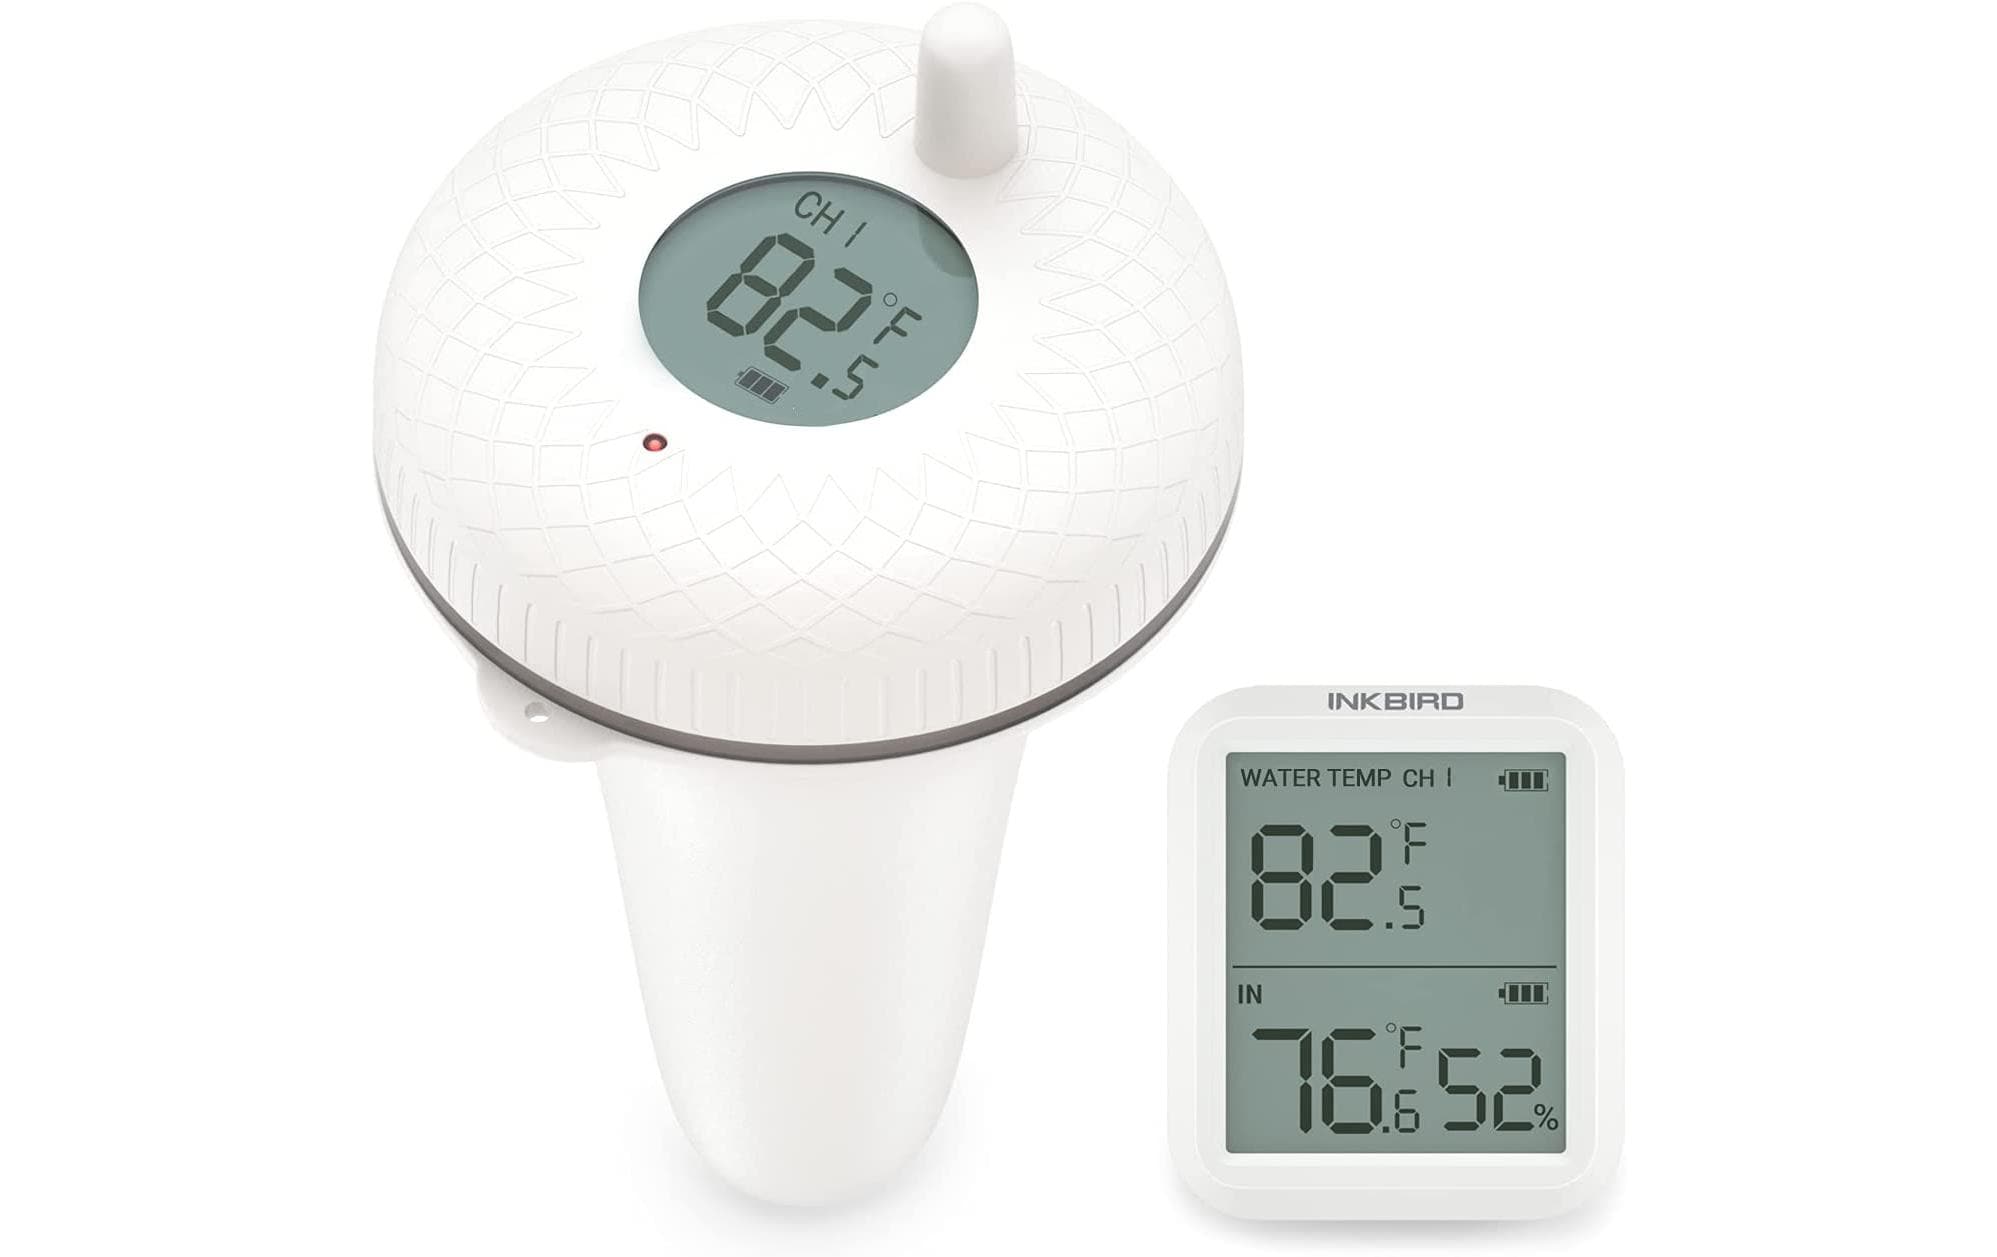 Inkbird Thermometer IBS-P01R